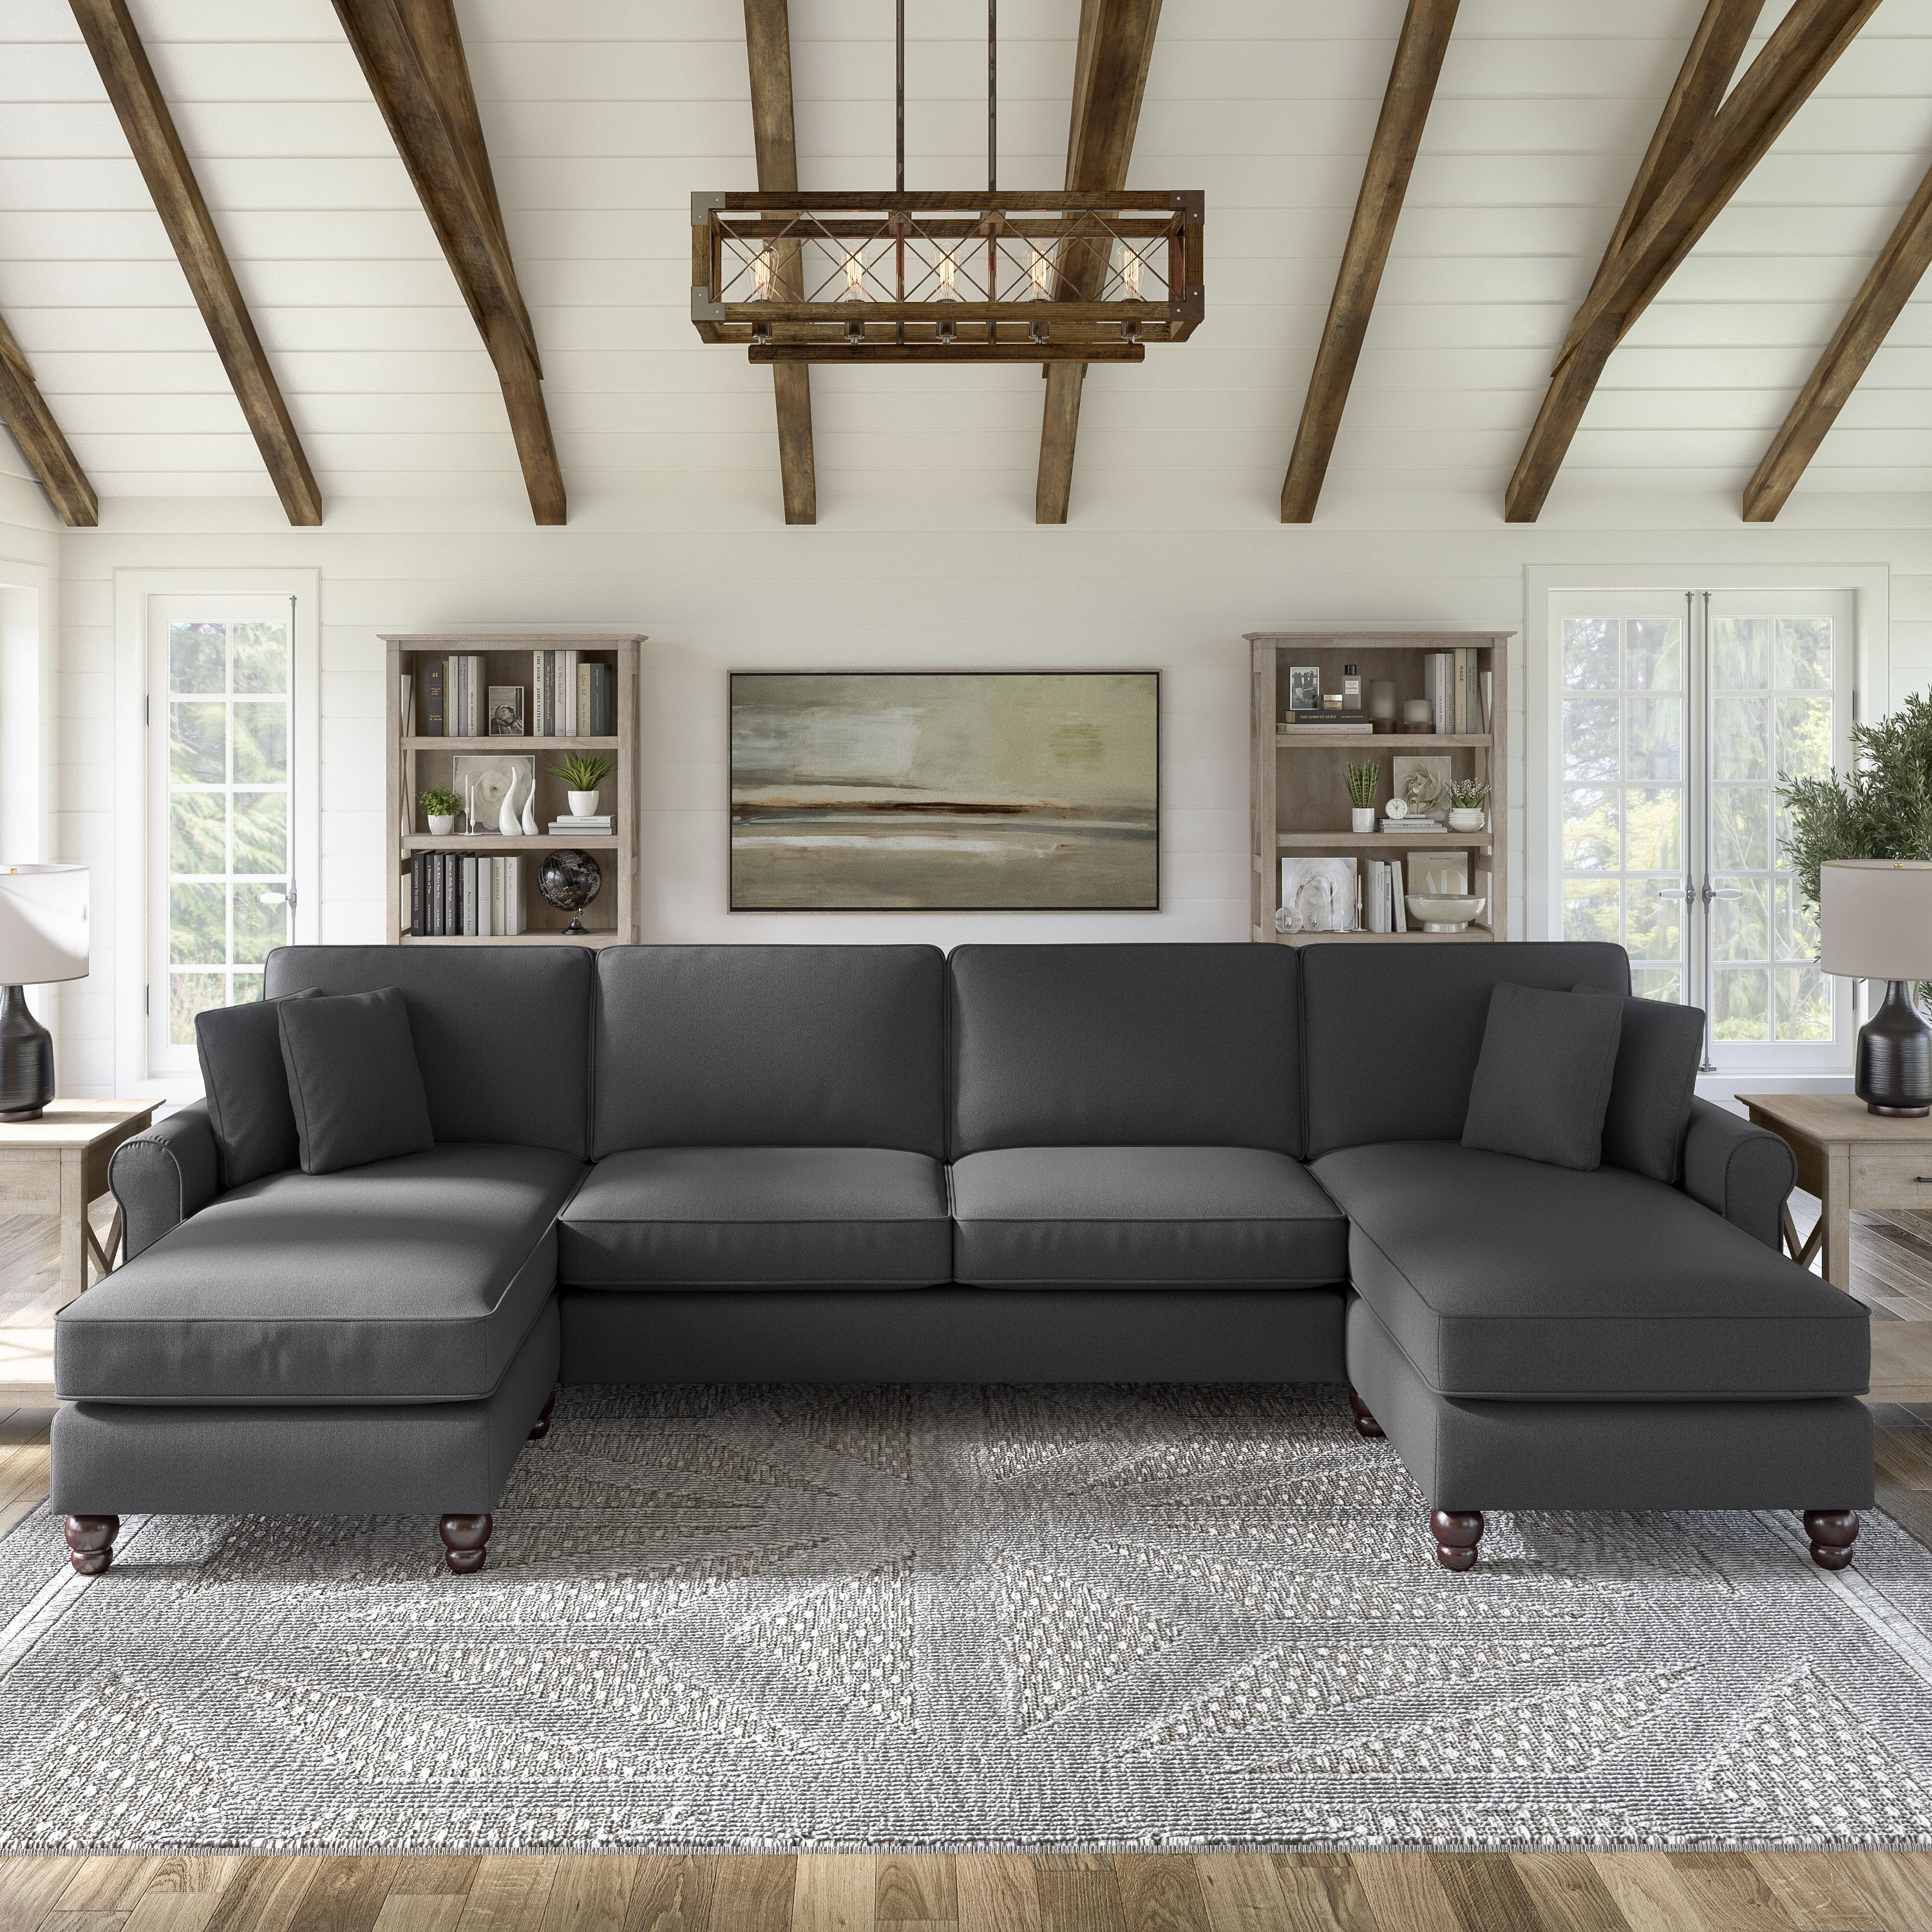 Shop Bush Furniture Hudson 131W Sectional Couch with Double Chaise Lounge 01 HDY130BCGH-03K #color_charcoal gray herringbone fabr